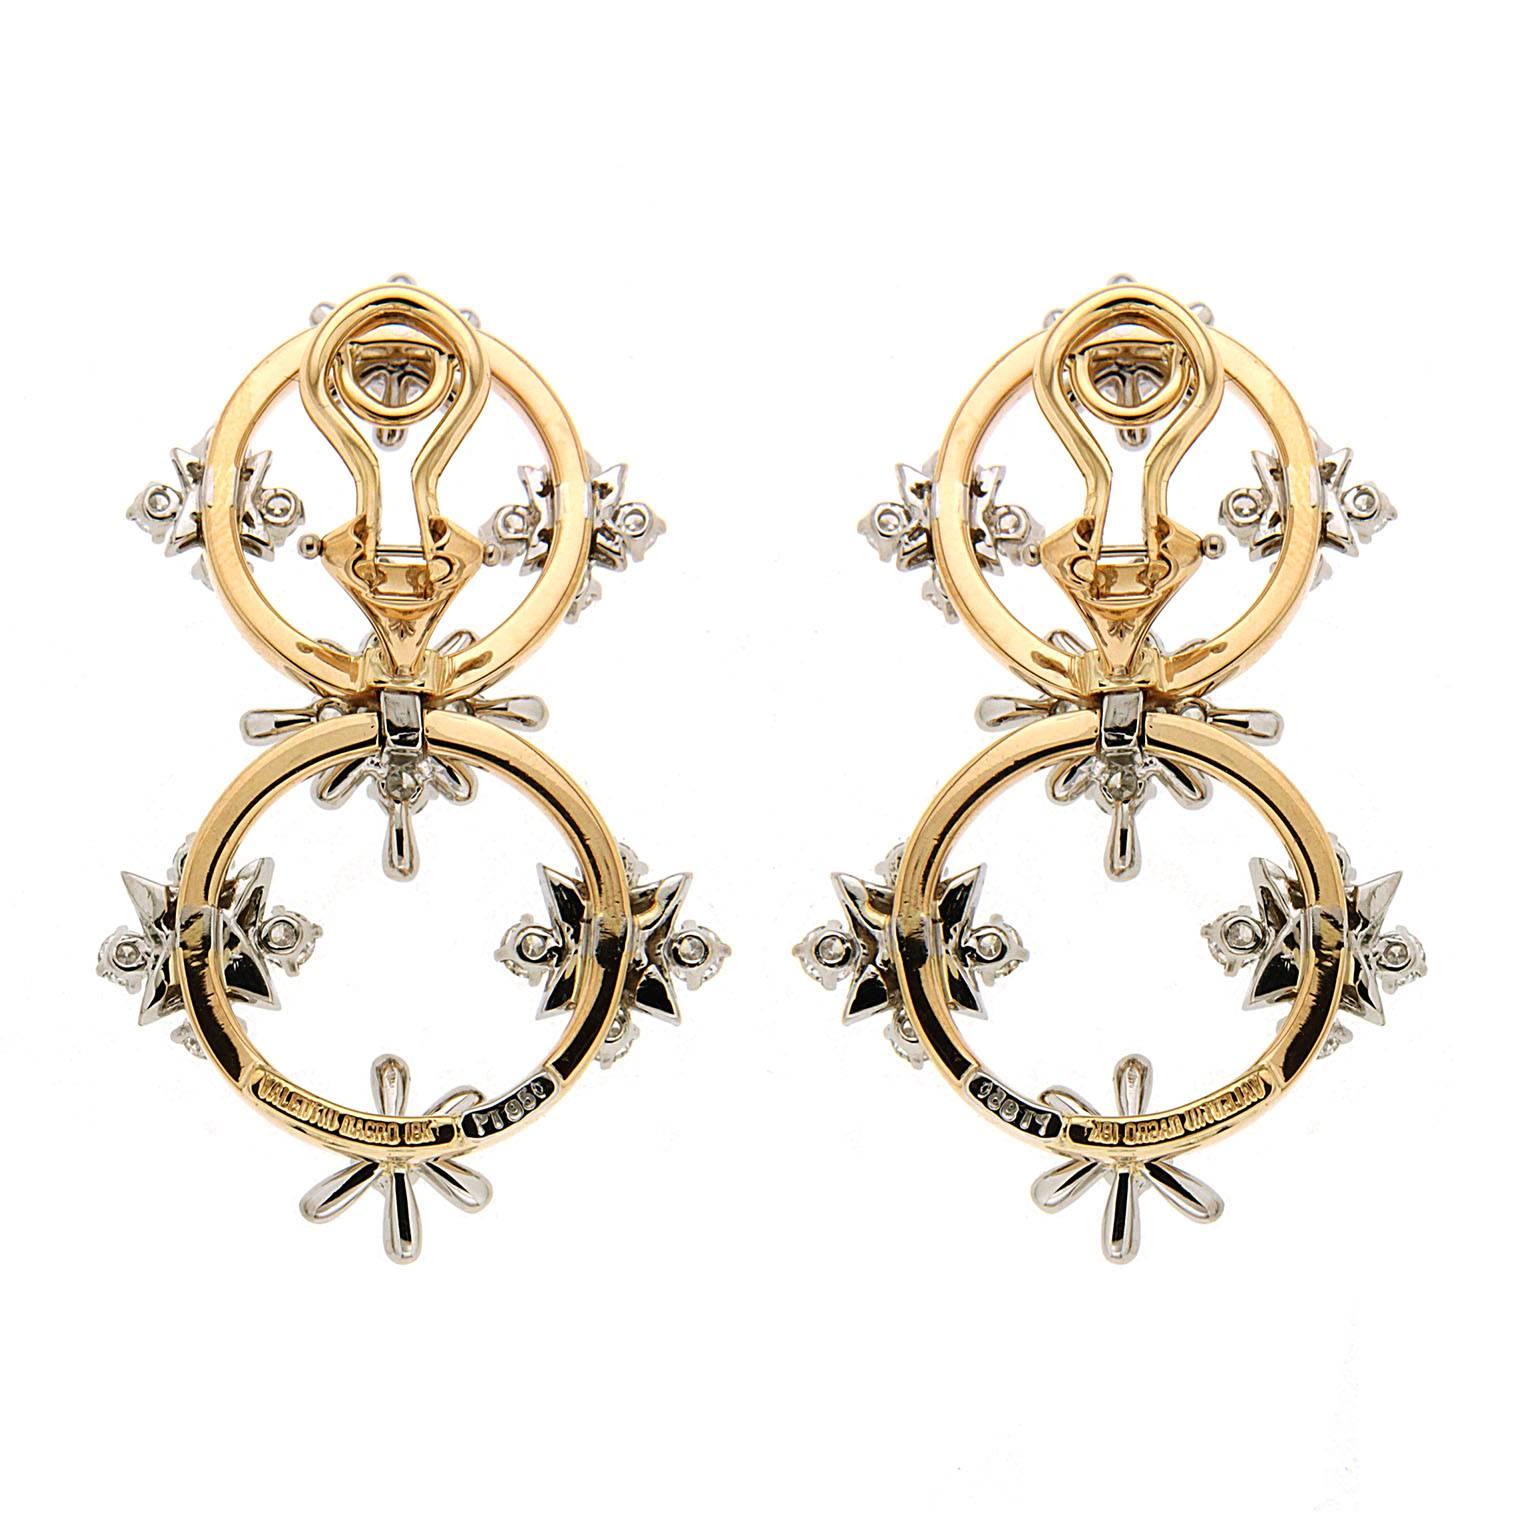 This unique pair of earrings features two circle links with diamonds and floral / star motifs conveys an airy feeling. The earrings are completed in 18kt yellow gold and Platinum with clip backs. Matching bracelet is also available. 